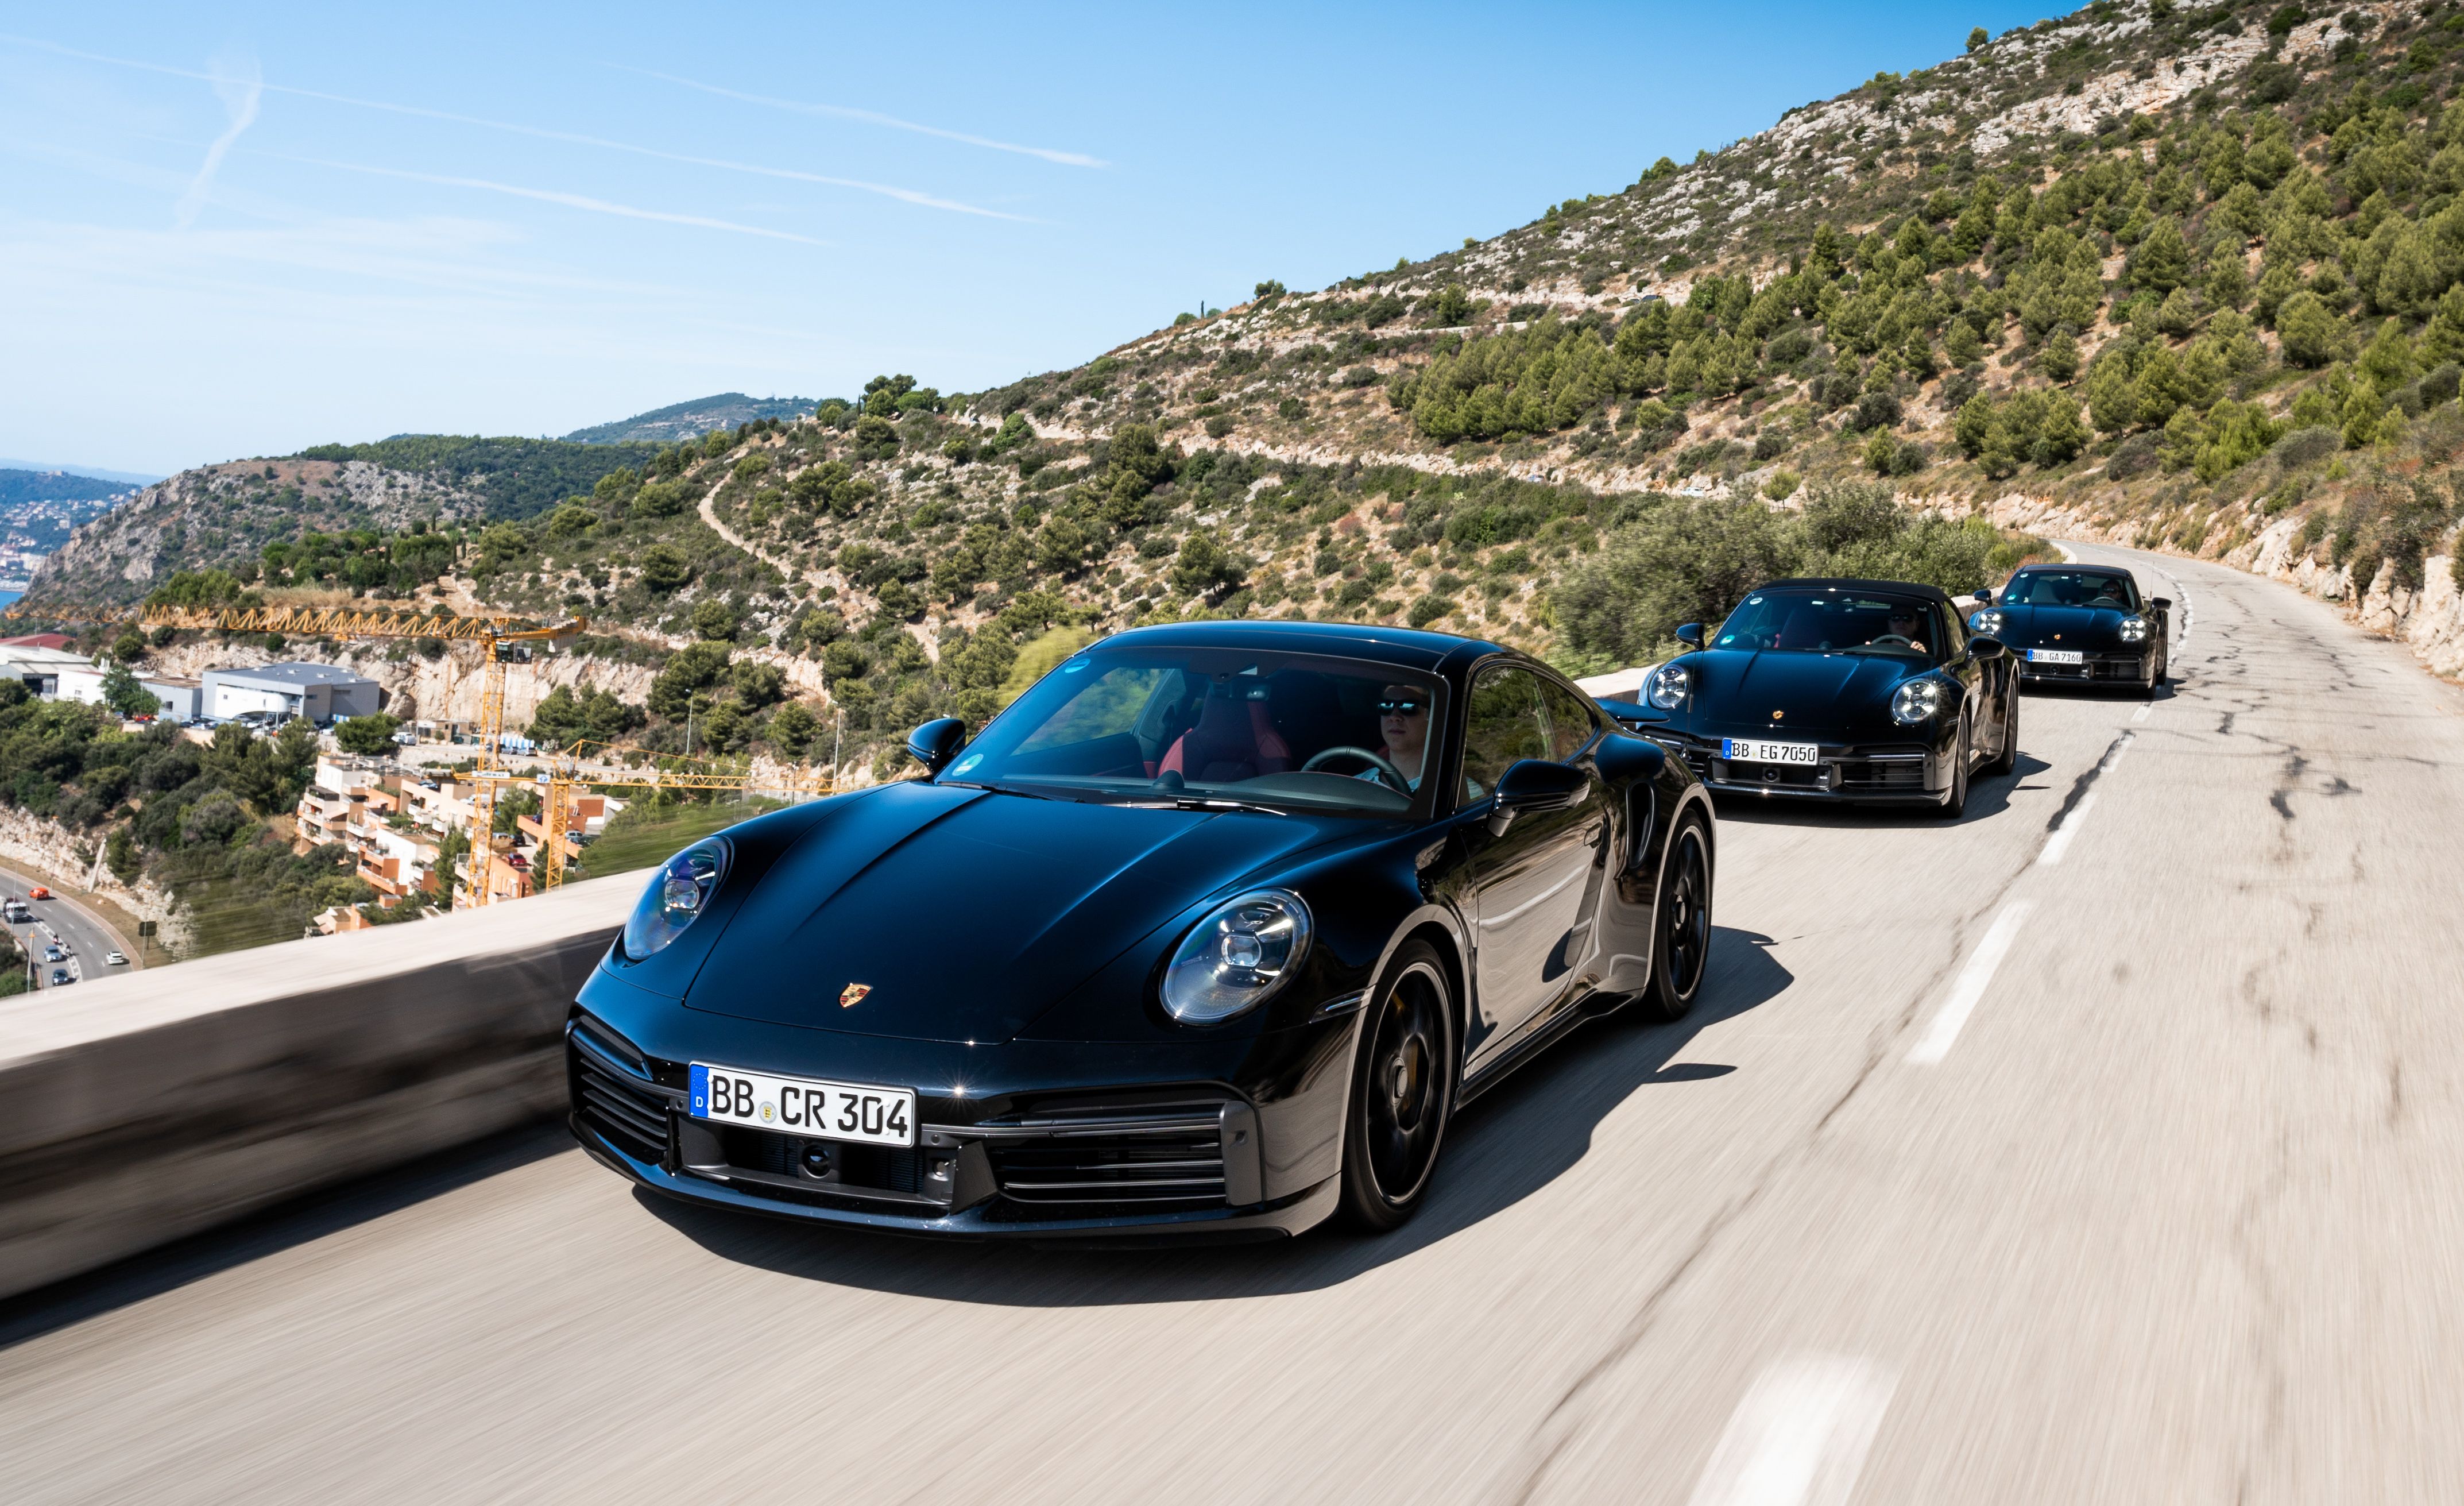 Everything We Learned Riding in the 2020 Porsche 911 Turbo S